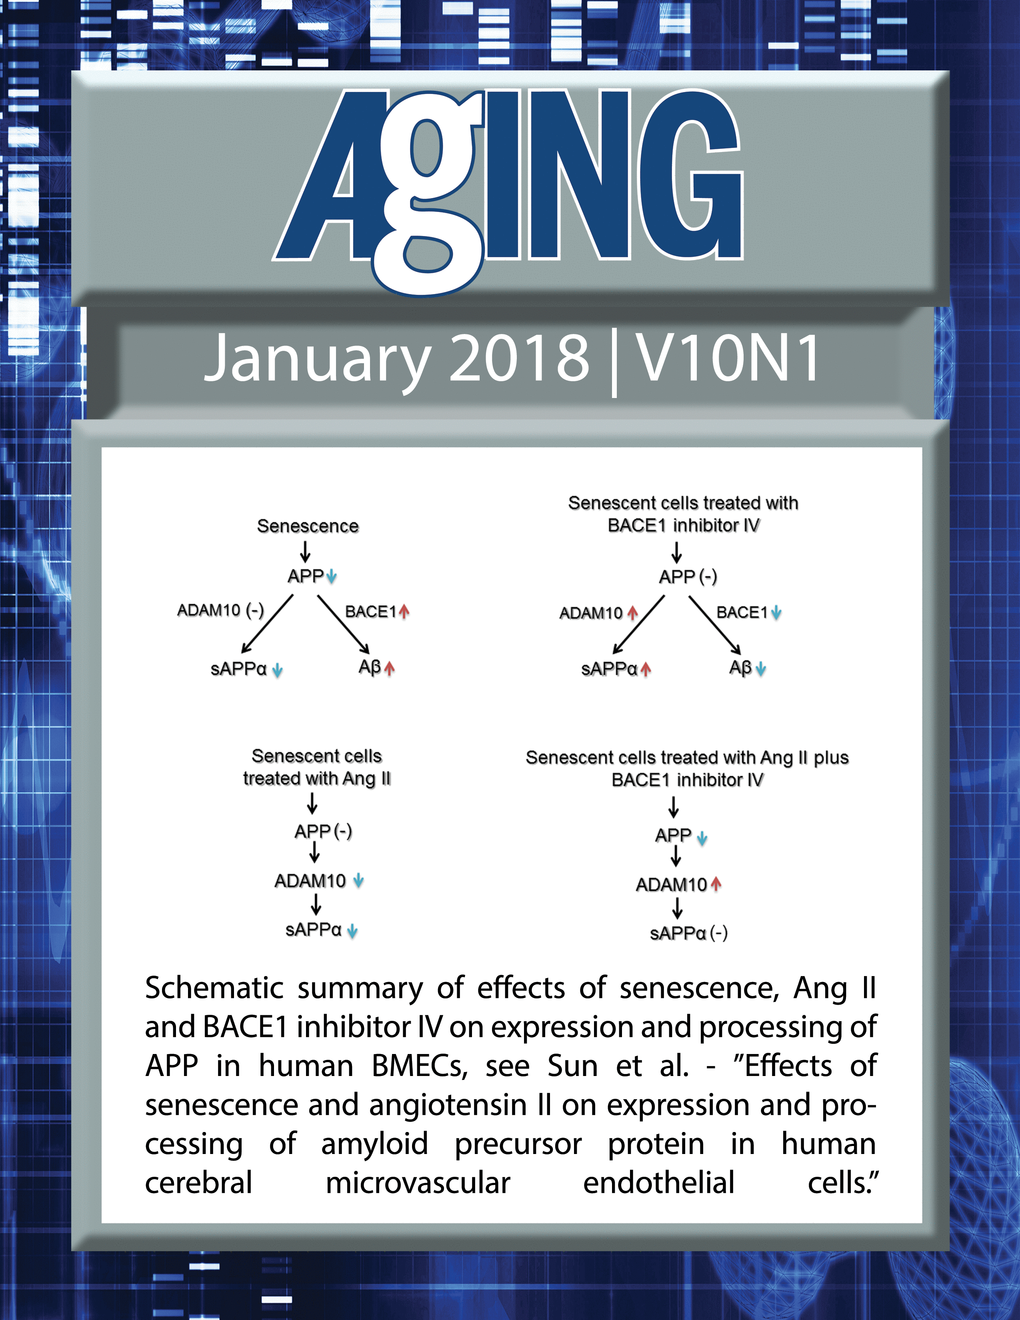 The cover for issue 1 of Aging features Figure 6 "Schematic summary of effects of senescence, Ang II and BACE1 inhibitor IV on expression and processing of APP in human BMECs" from Sun et al.